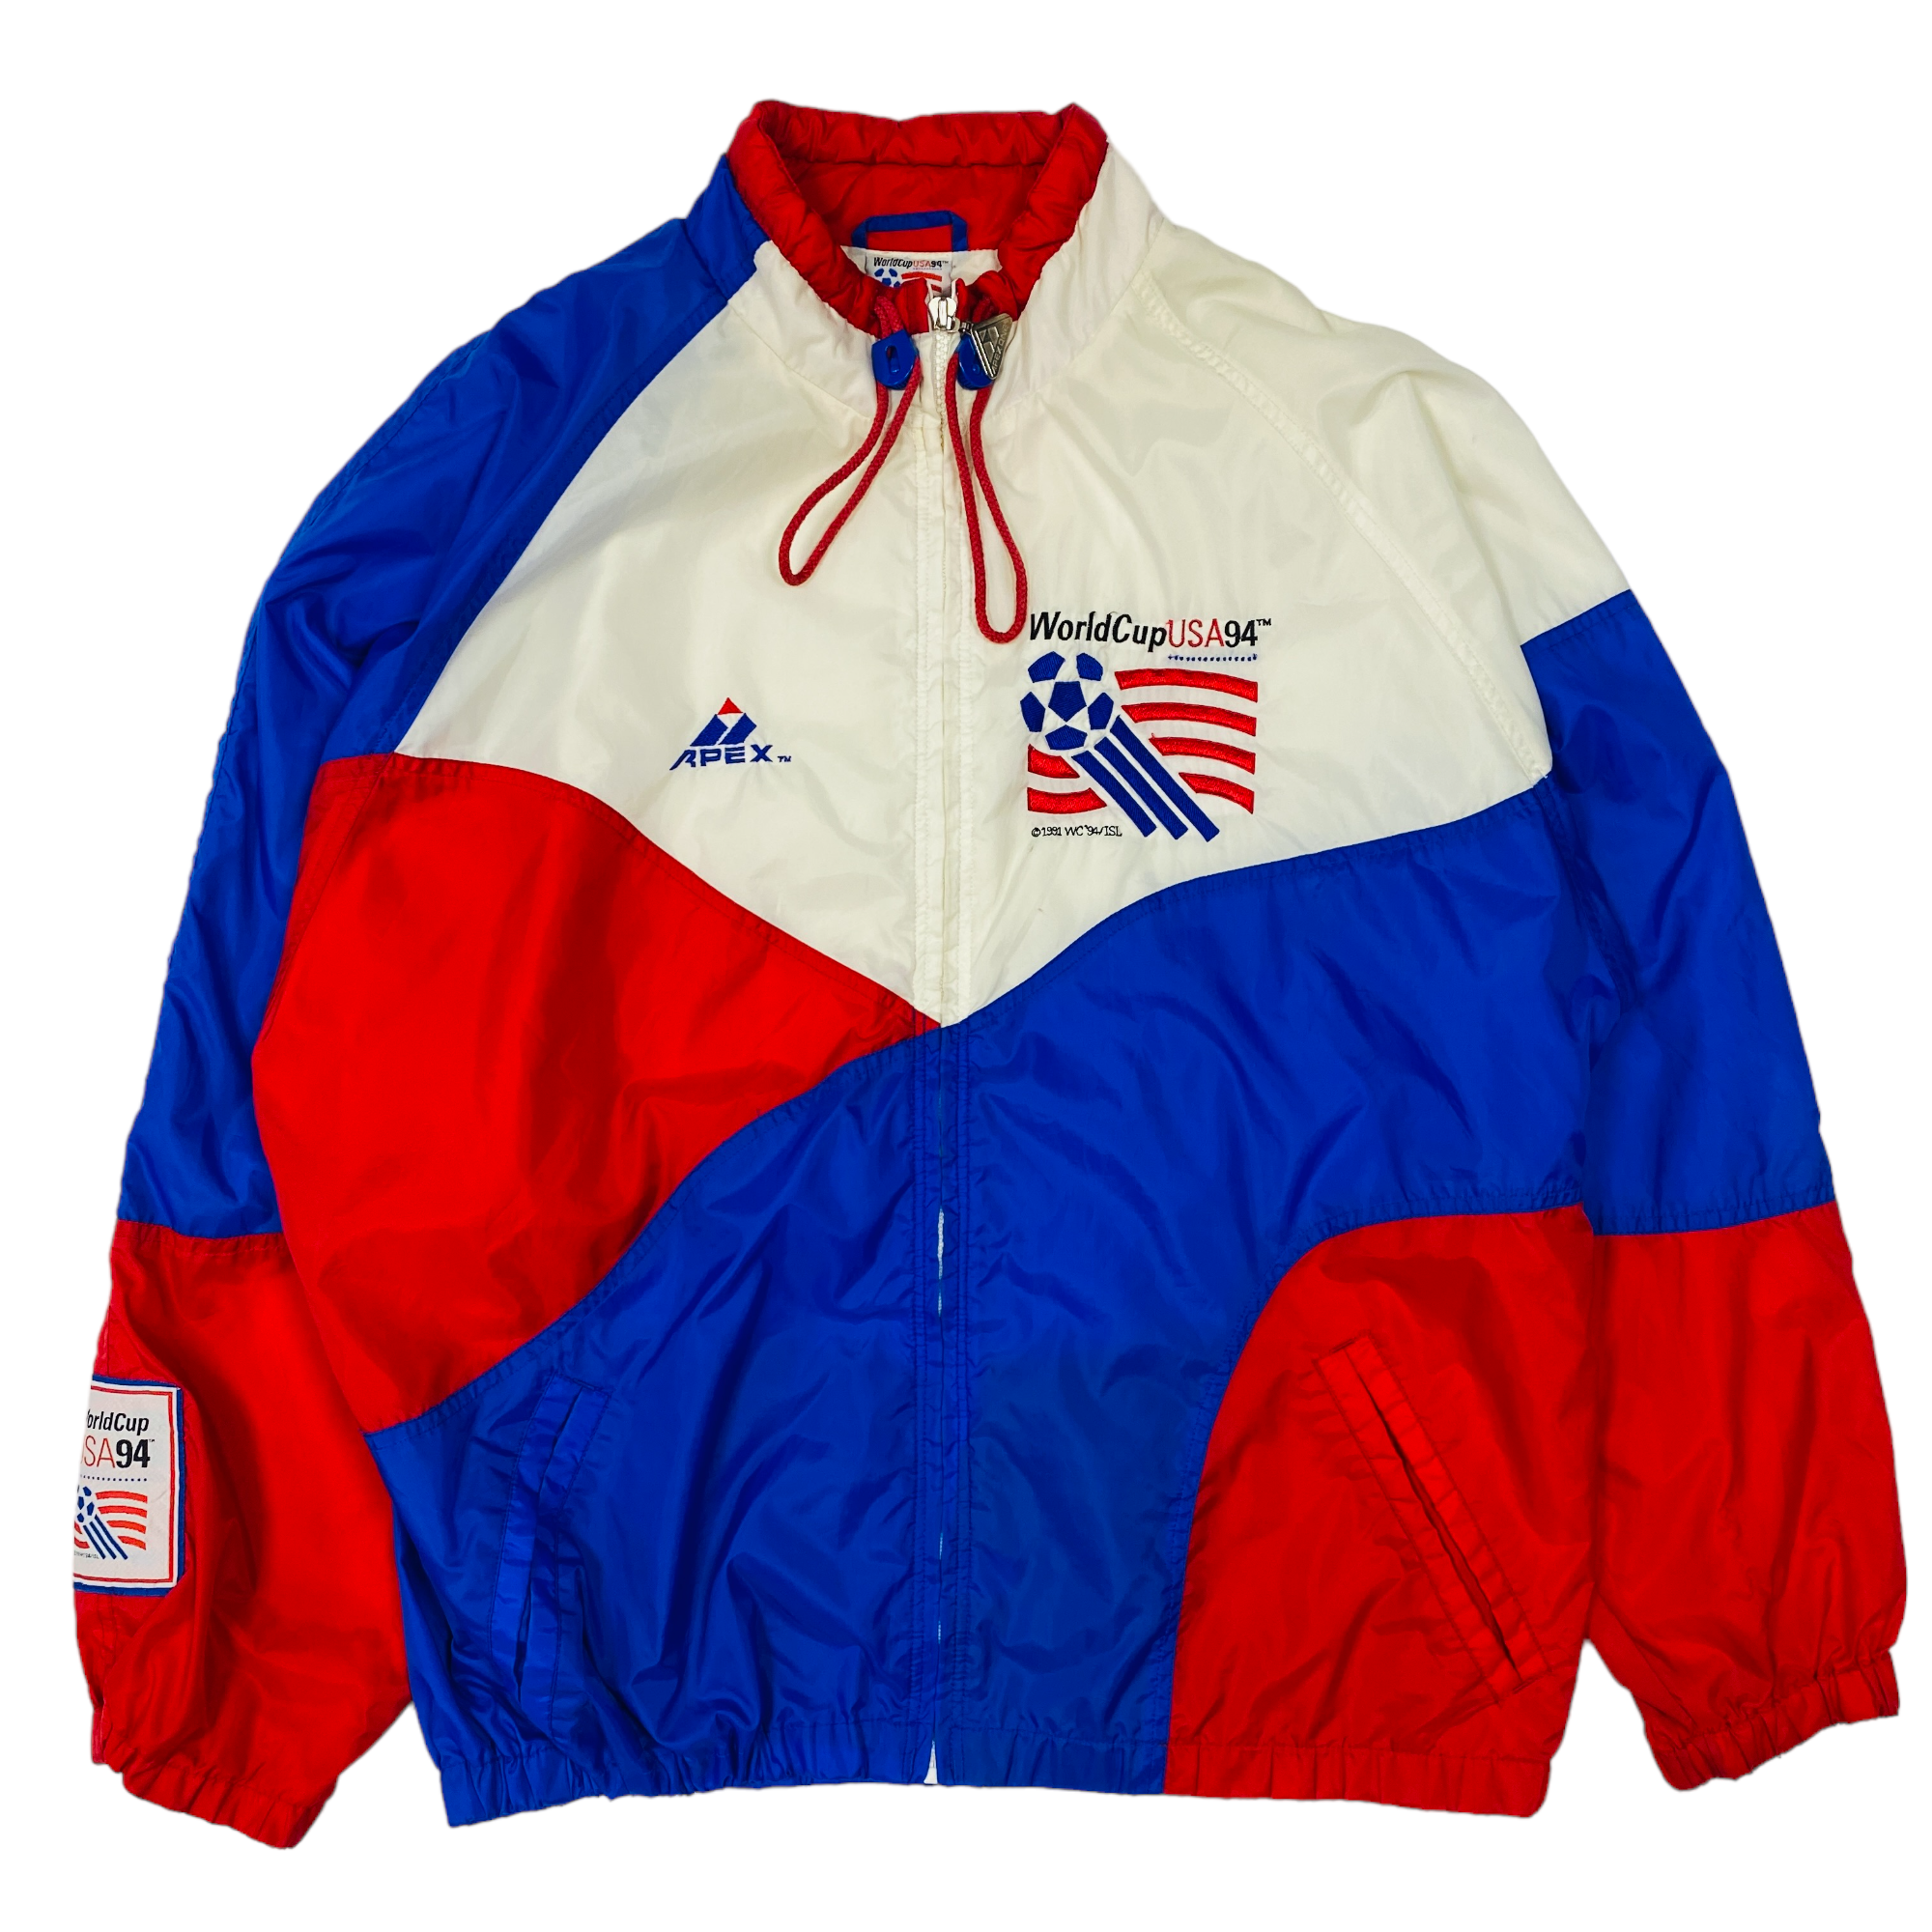 USA '94 World Cup Apex One Track Jacket - XL